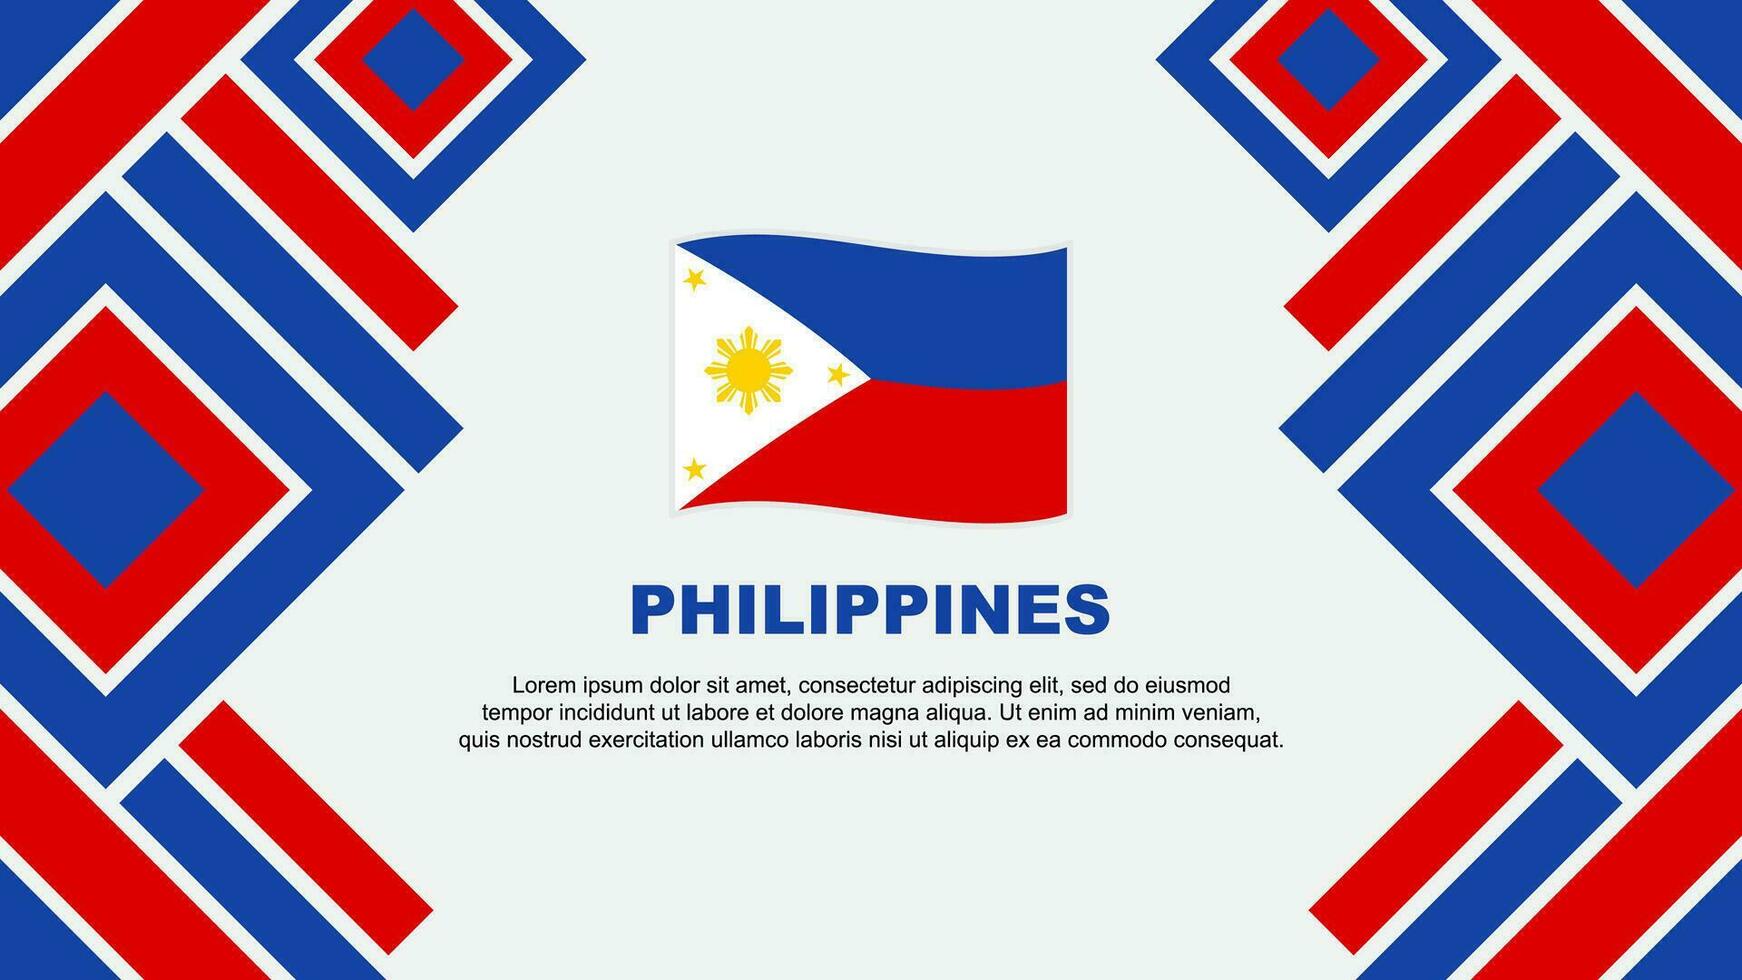 Philippines Flag Abstract Background Design Template. Philippines Independence Day Banner Wallpaper Vector Illustration. Philippines